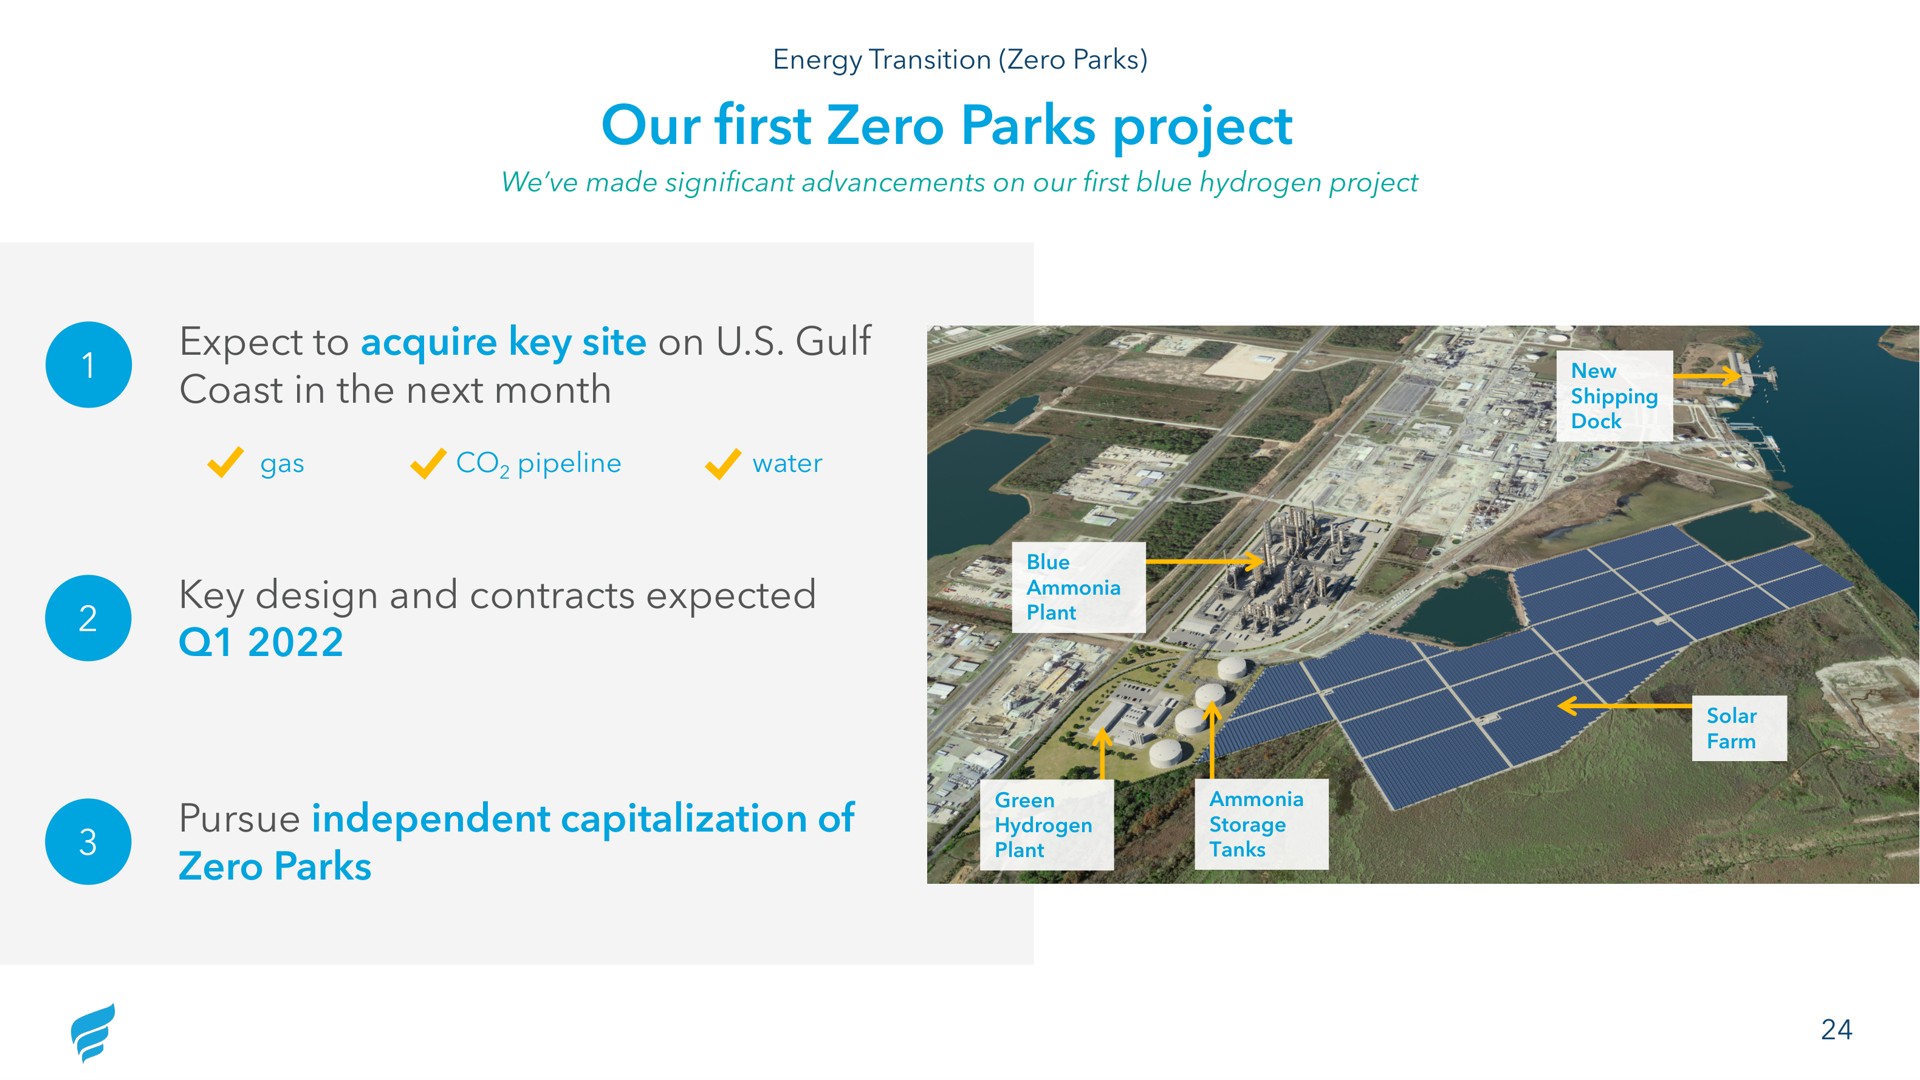 our first zero parks project expect to acquire key site on gulf coast in the next month key design and contracts expected pursue independent capitalization of zero parks a hydrogen storage | NewFortress Energy